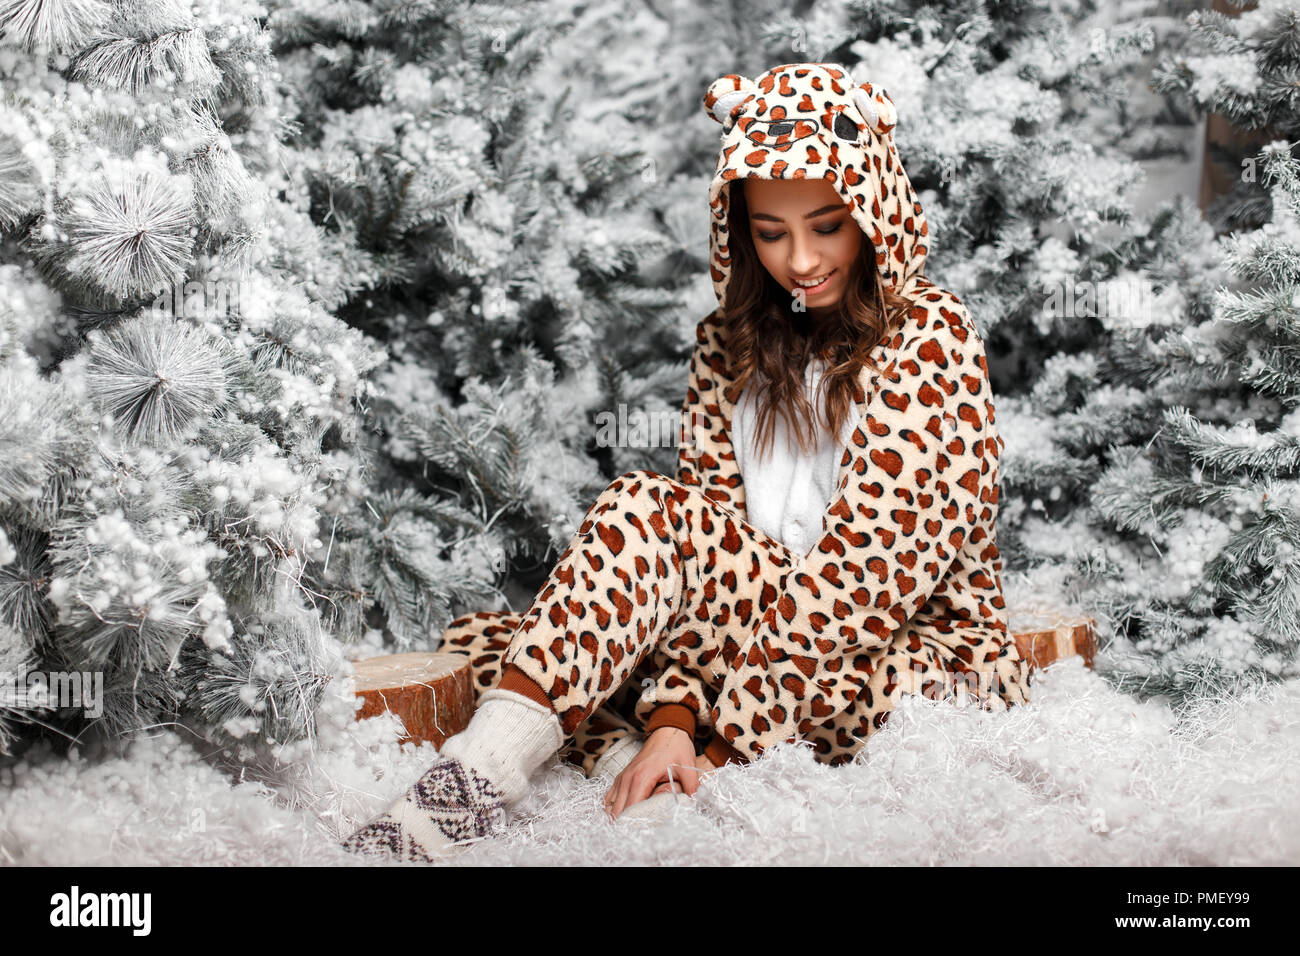 Funny young happy woman in fashionable bear wearing pajamas with hood sitting near Christmas trees with snow in studio Stock Photo